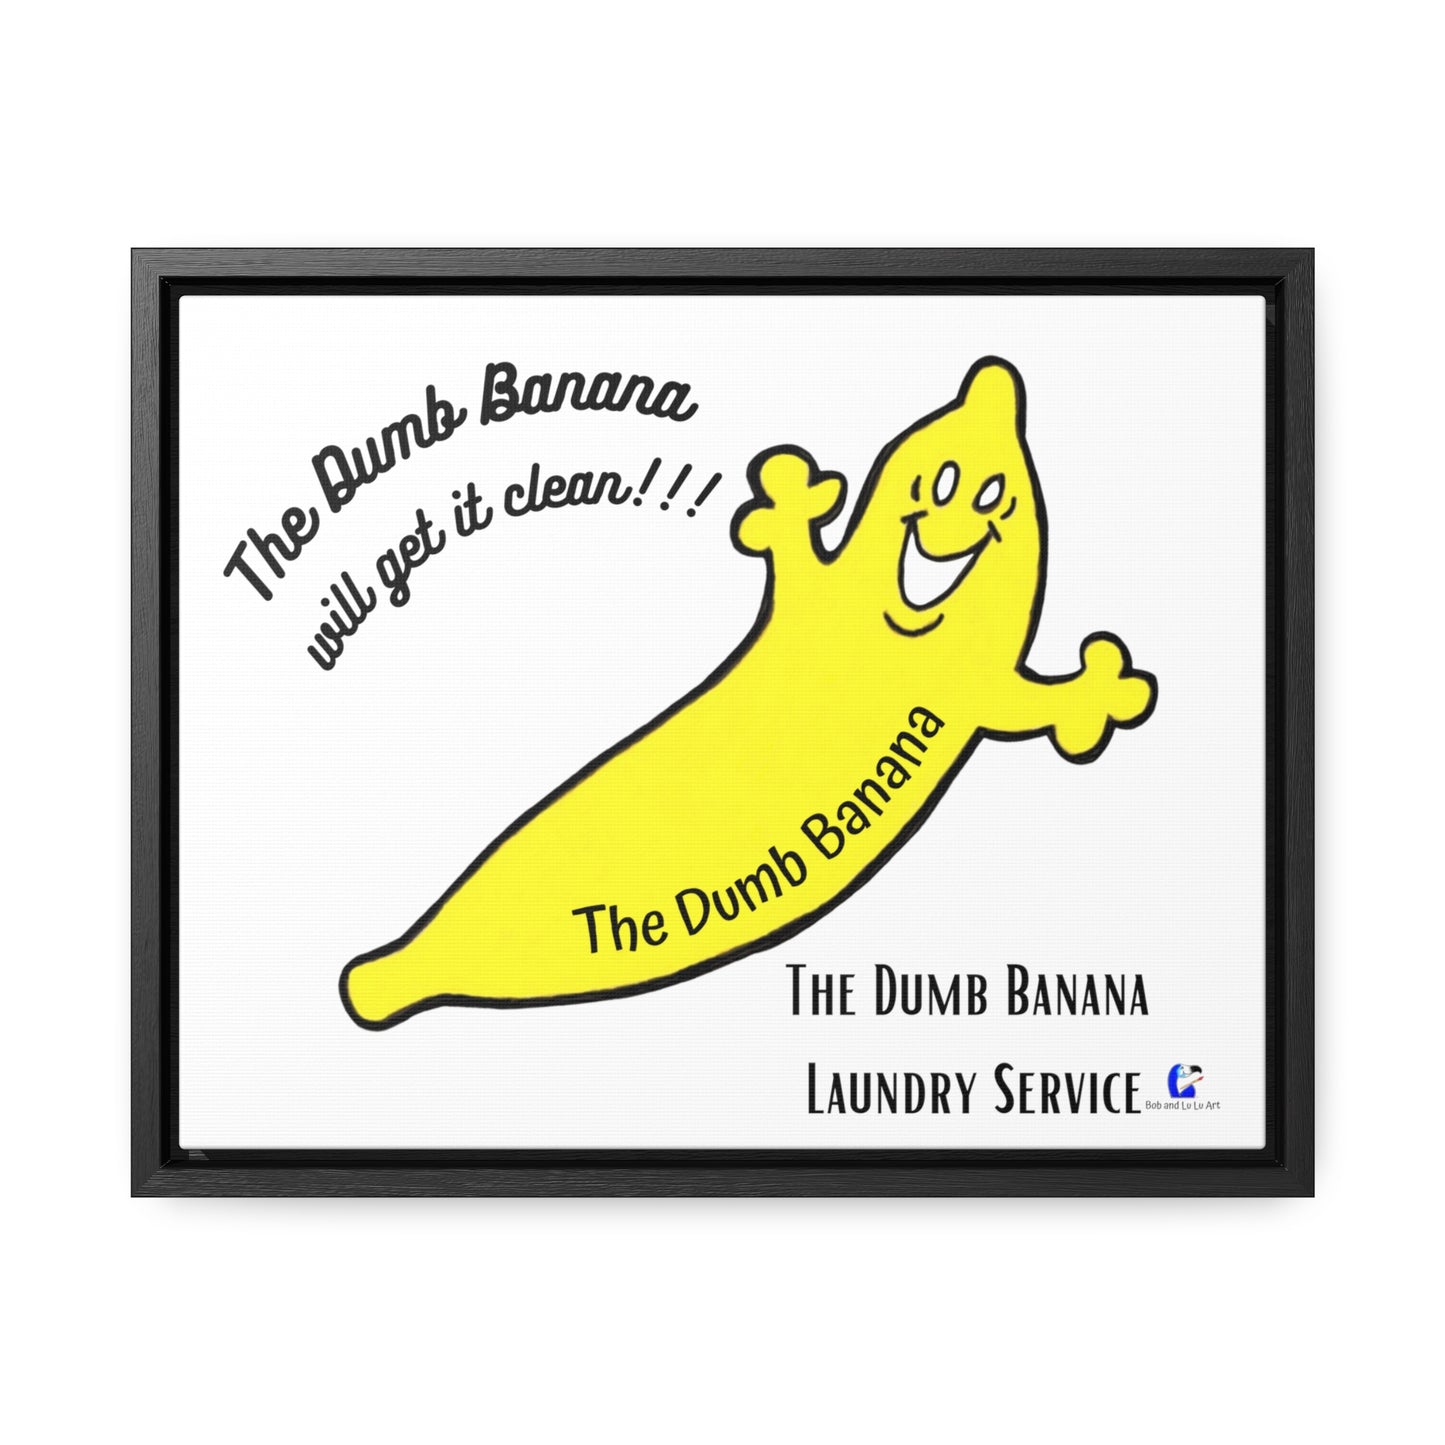 The Dumb Banana "WILL GET IT CLEAN" Laundry Room Gallery Canvas Wrap in Black or Walnut Frame Options